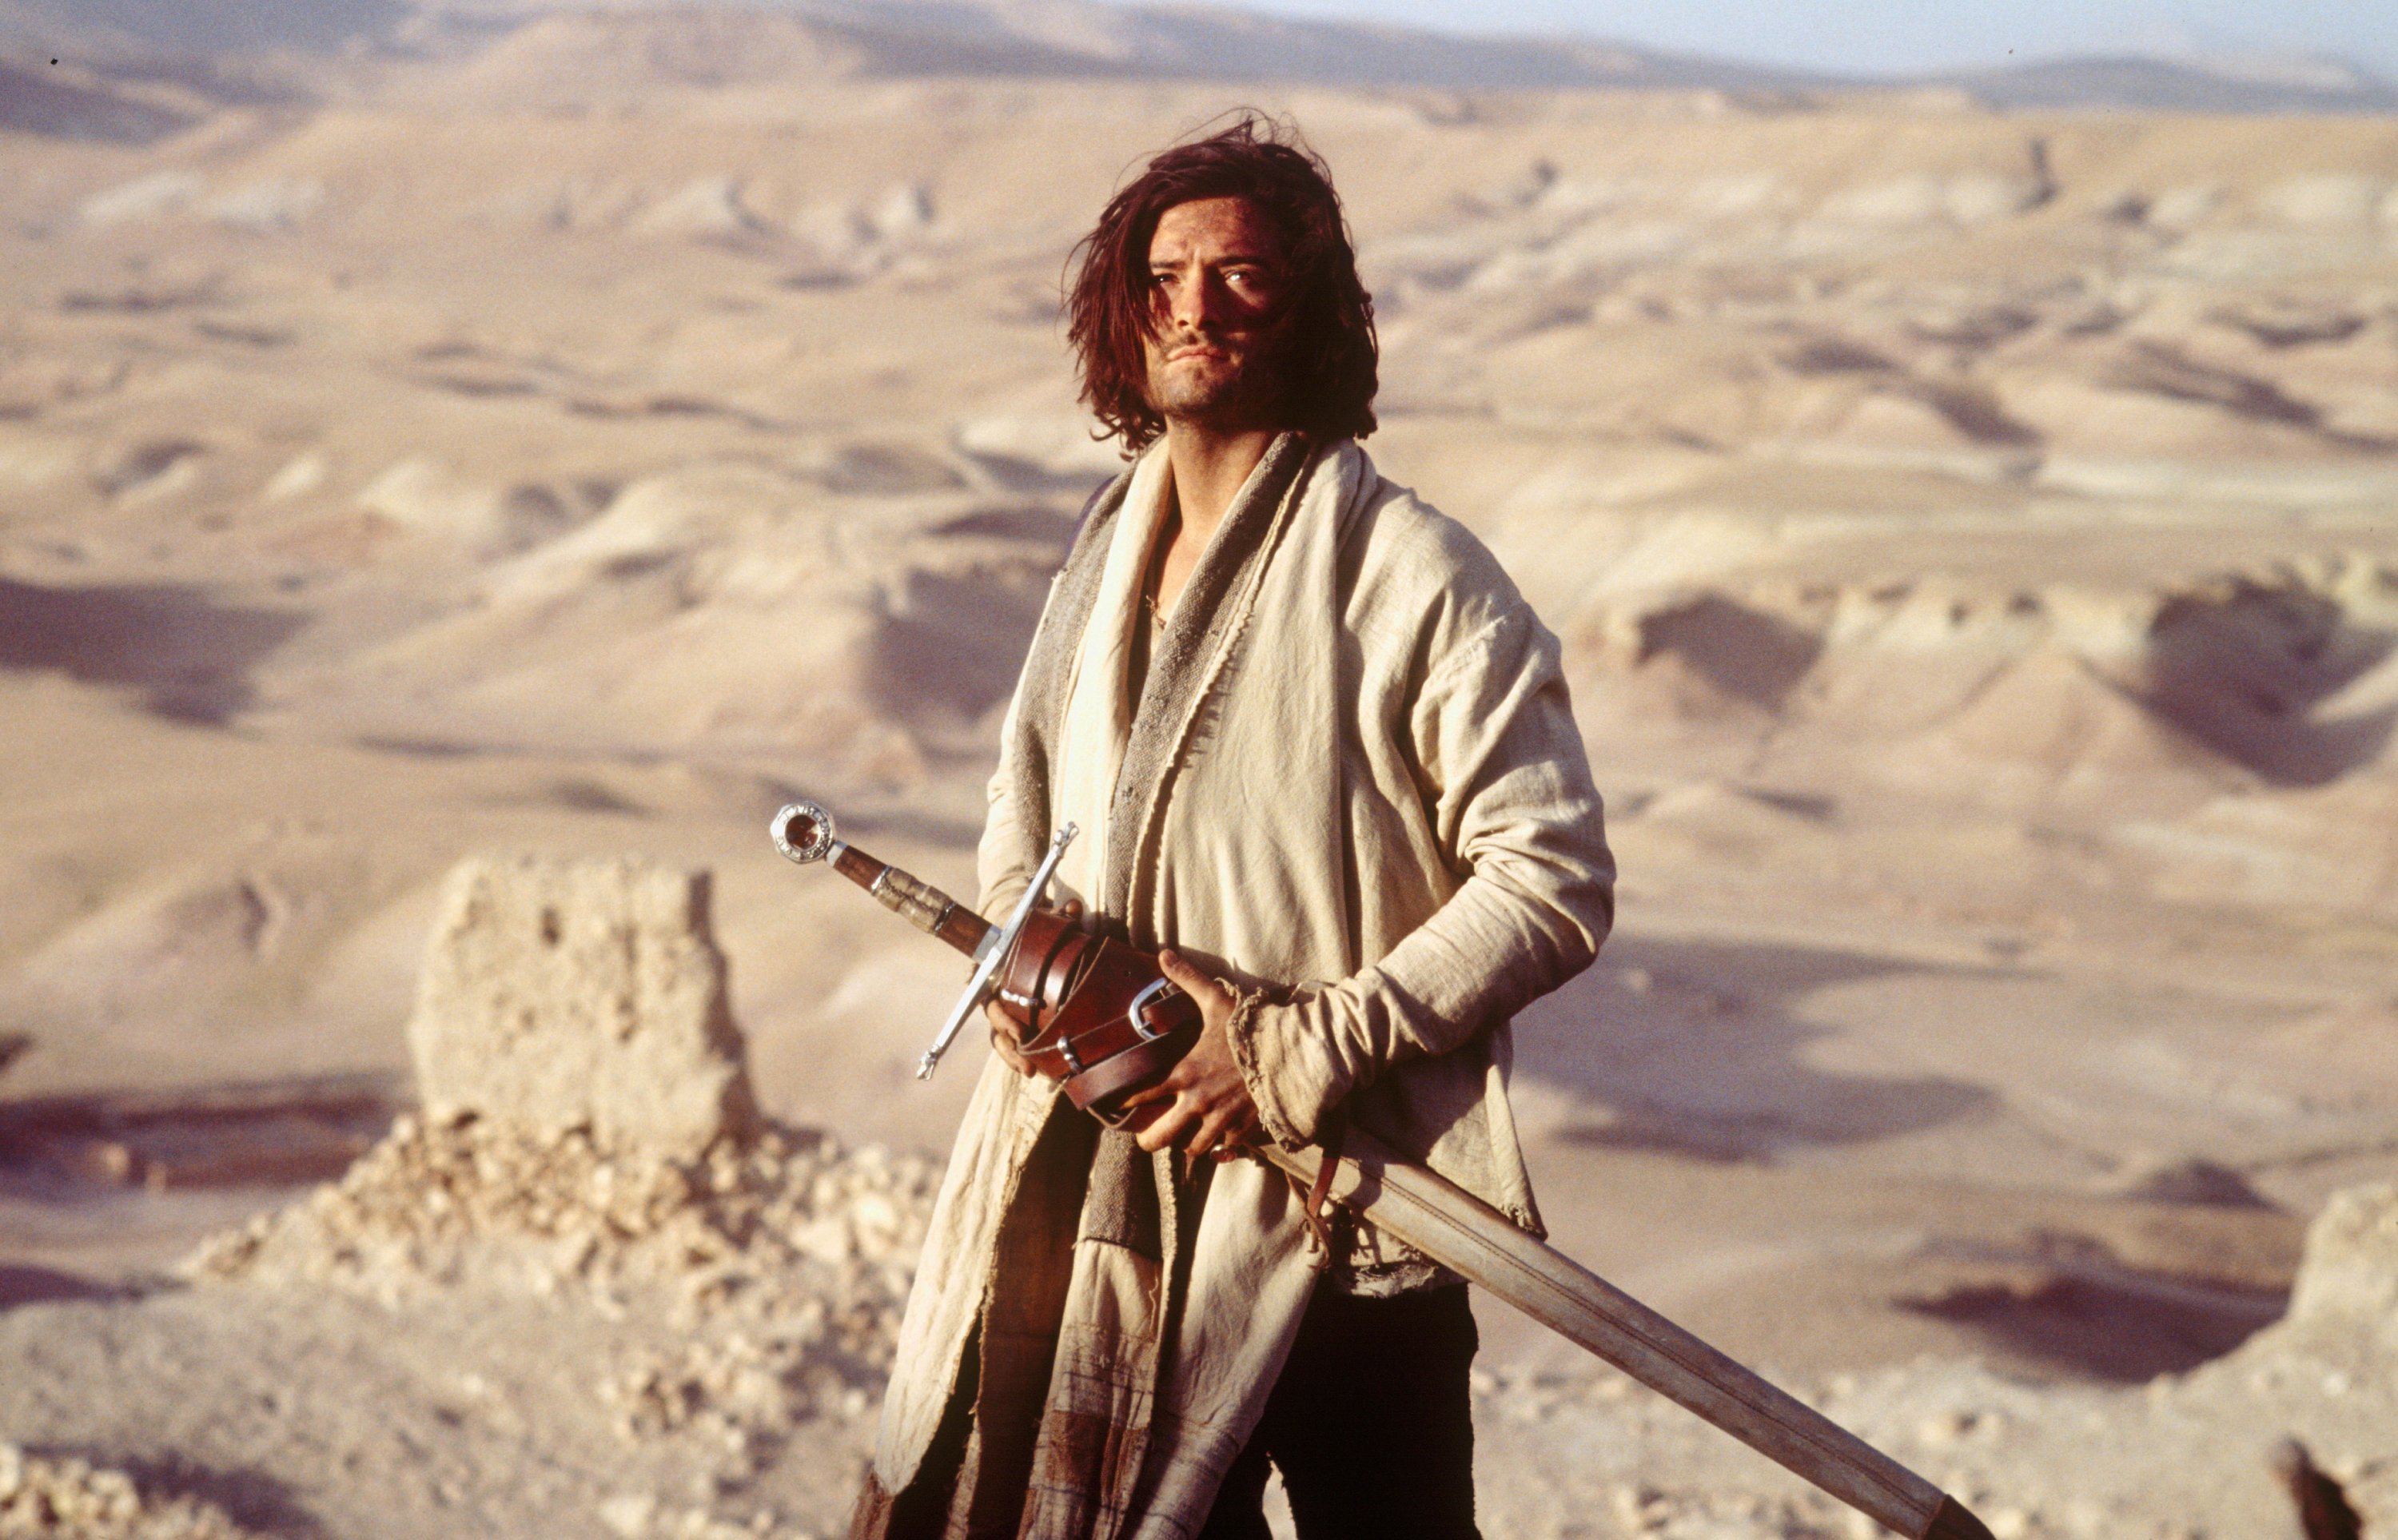 Orlando Bloom as Balian of Ibelin walks through a desert carrying nothing but his sword in a scene from the 2005 film “Kingdom of Heaven.” (Archive Photo)